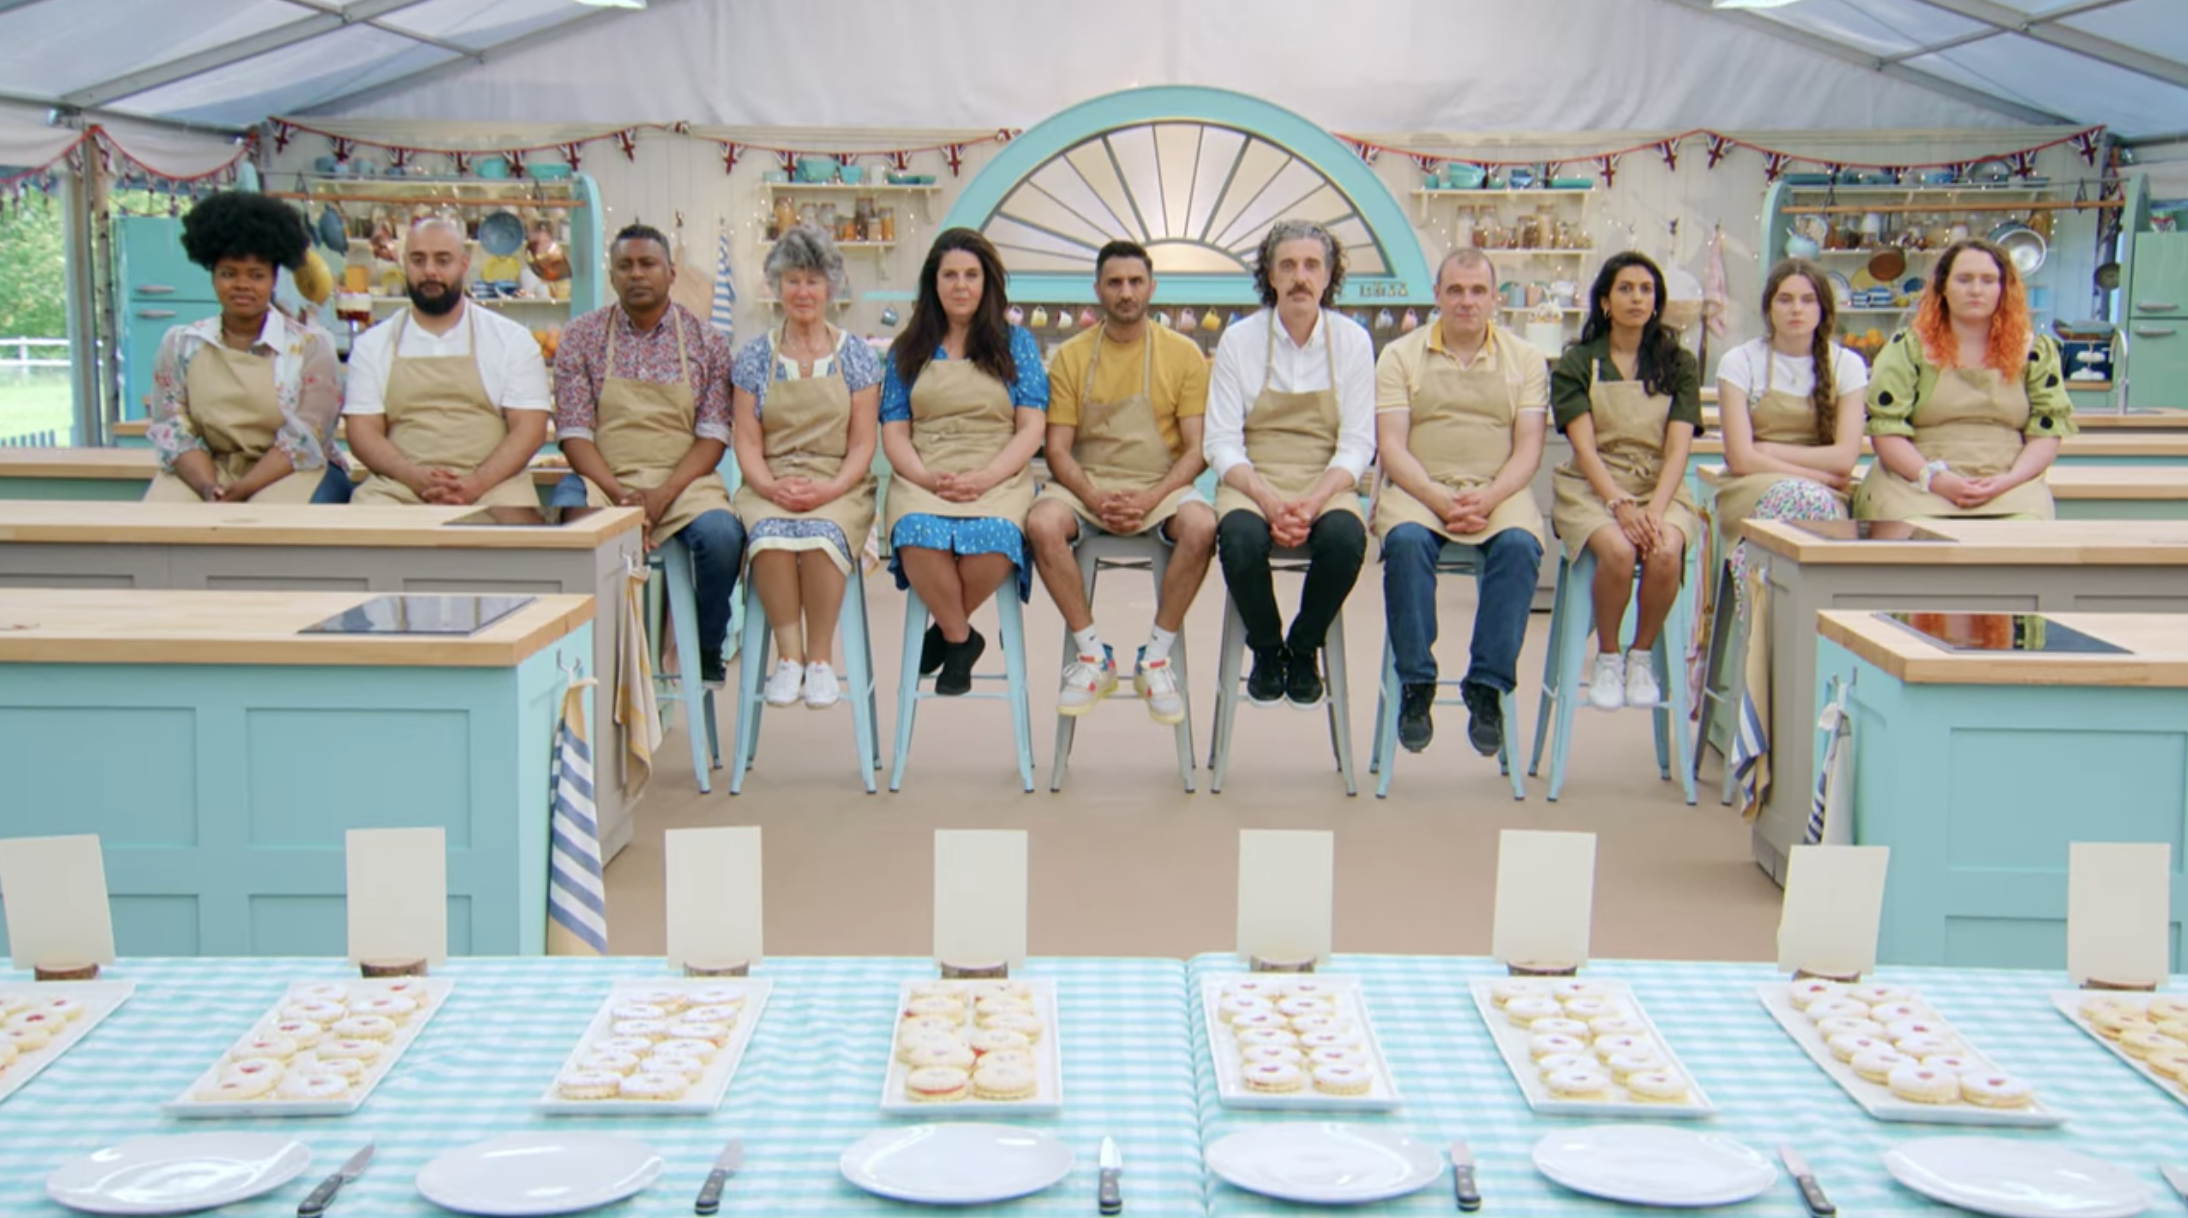 The eleven bakers wait for judgement on their technical challenge round